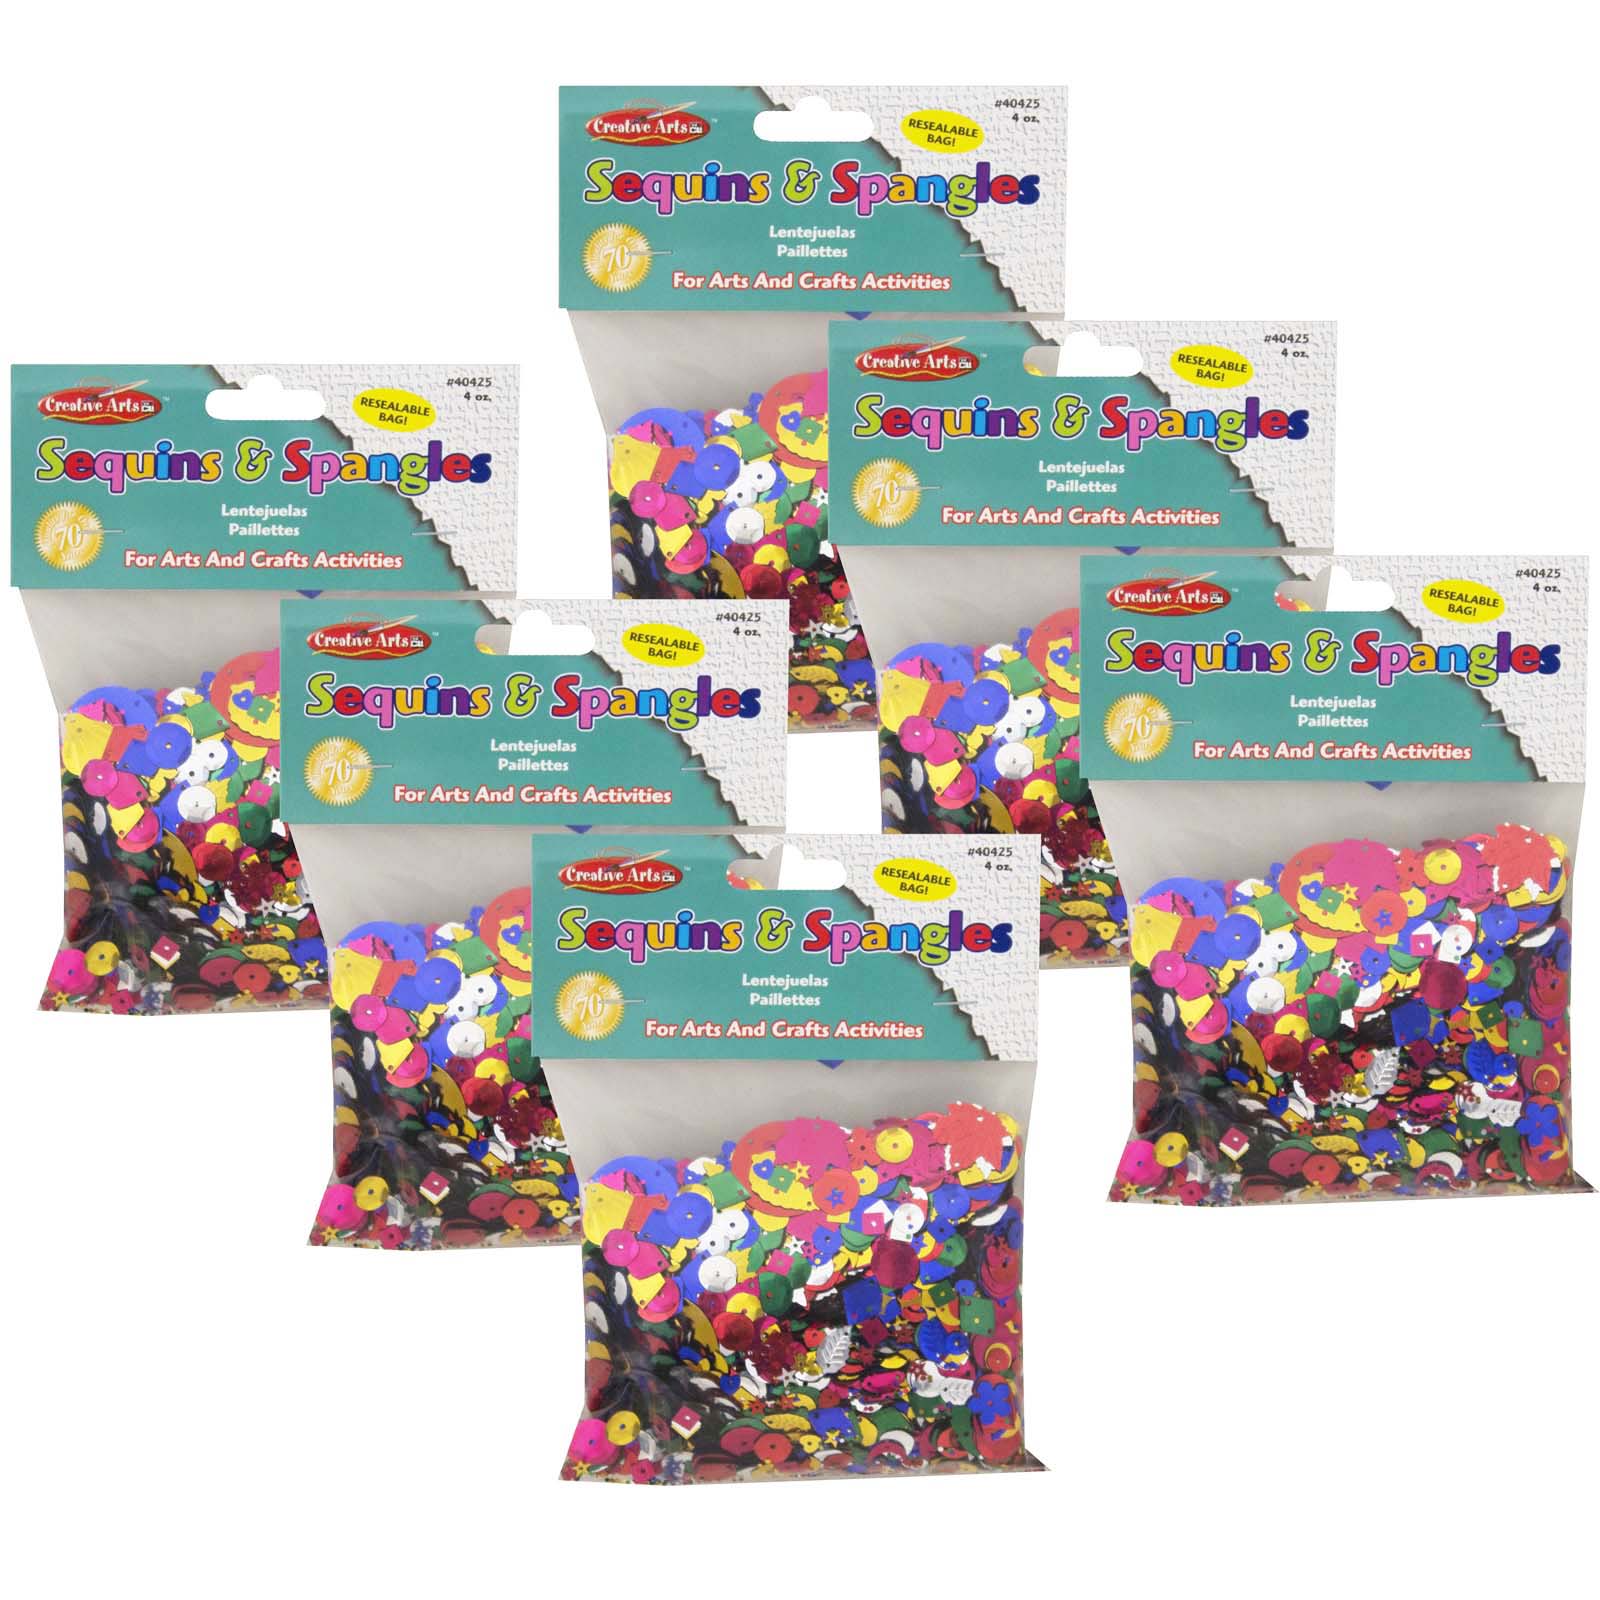 Glittering Sequins with Spangles, 4 oz Per Pack, 6 Packs